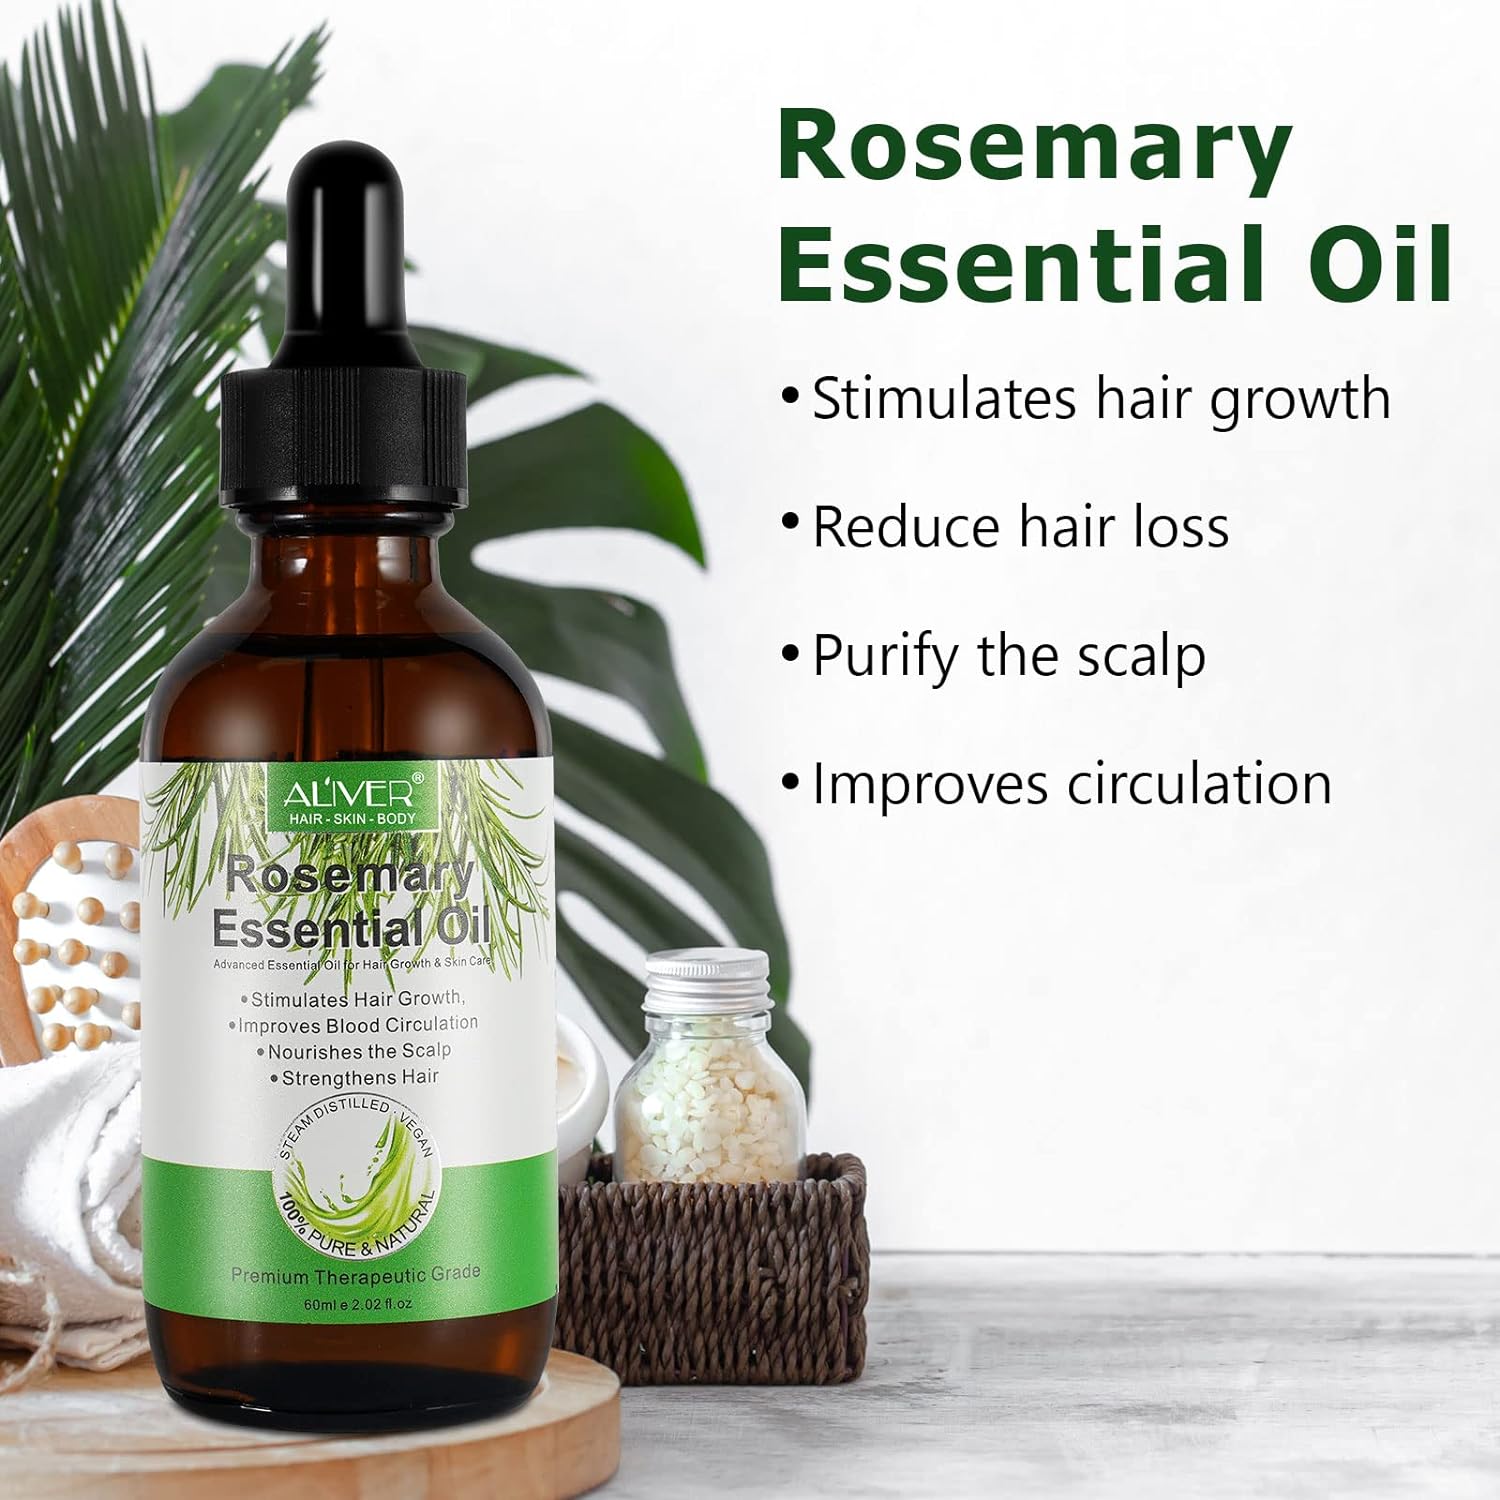 Hair Growth Rosemary Oil Review: 10 Things That Might Surprise You